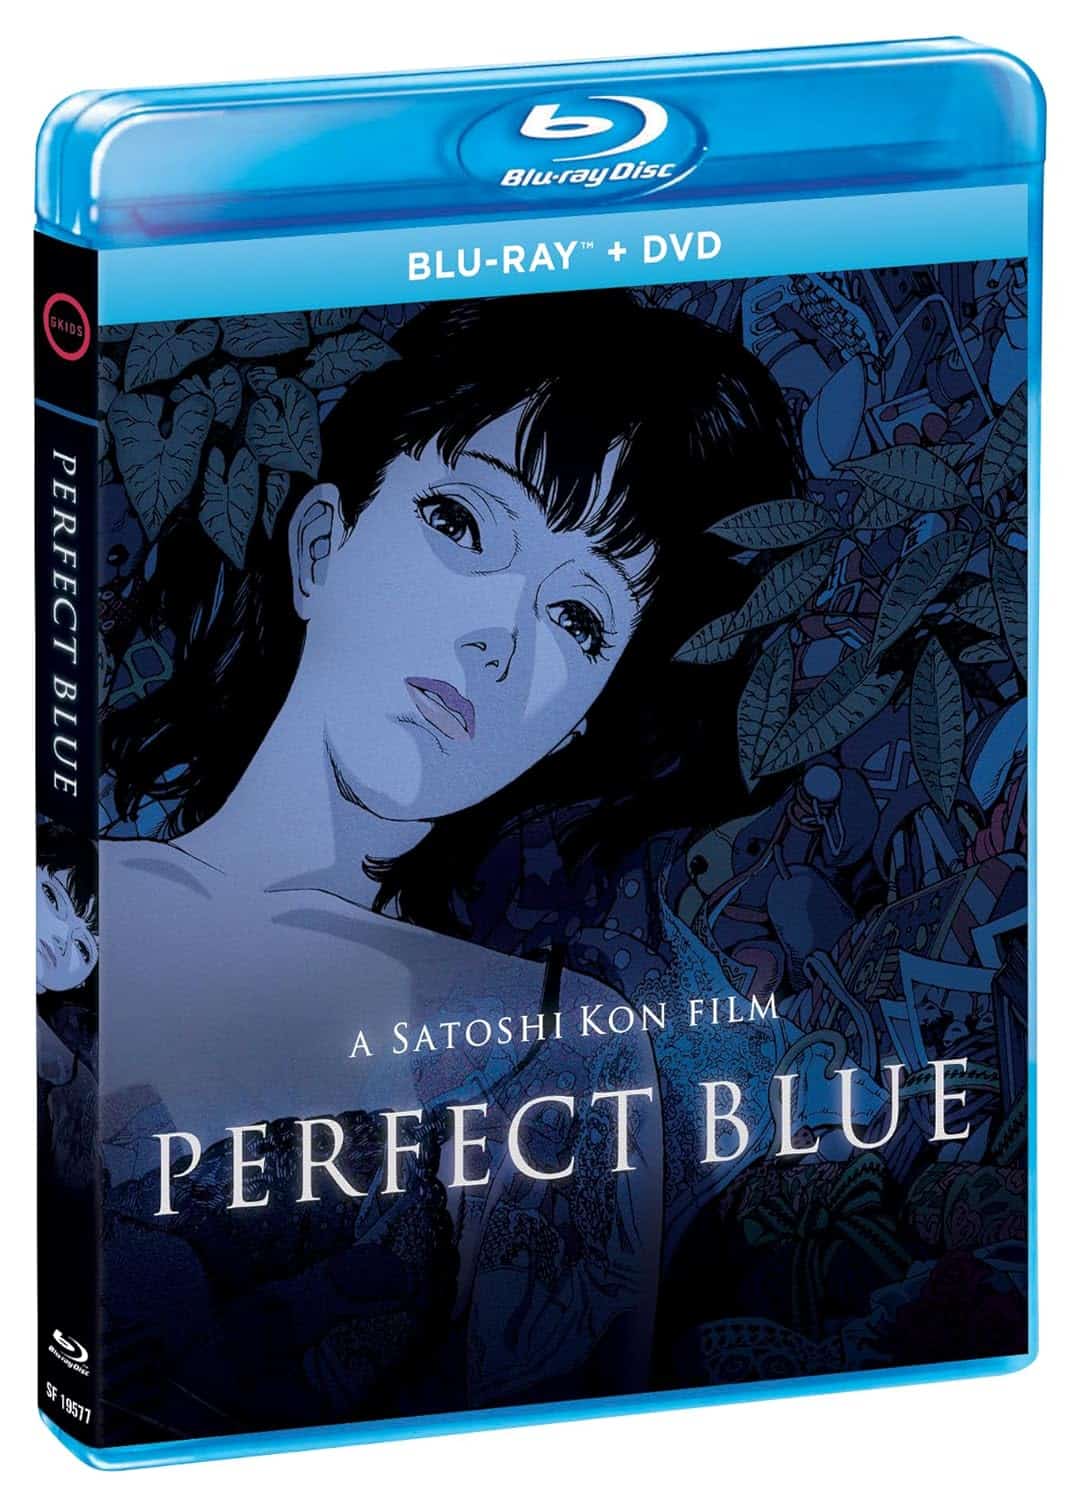 Perfect Blue Movie Poster 1997 Satoshi Kon Film Perfection Comes At a Cost